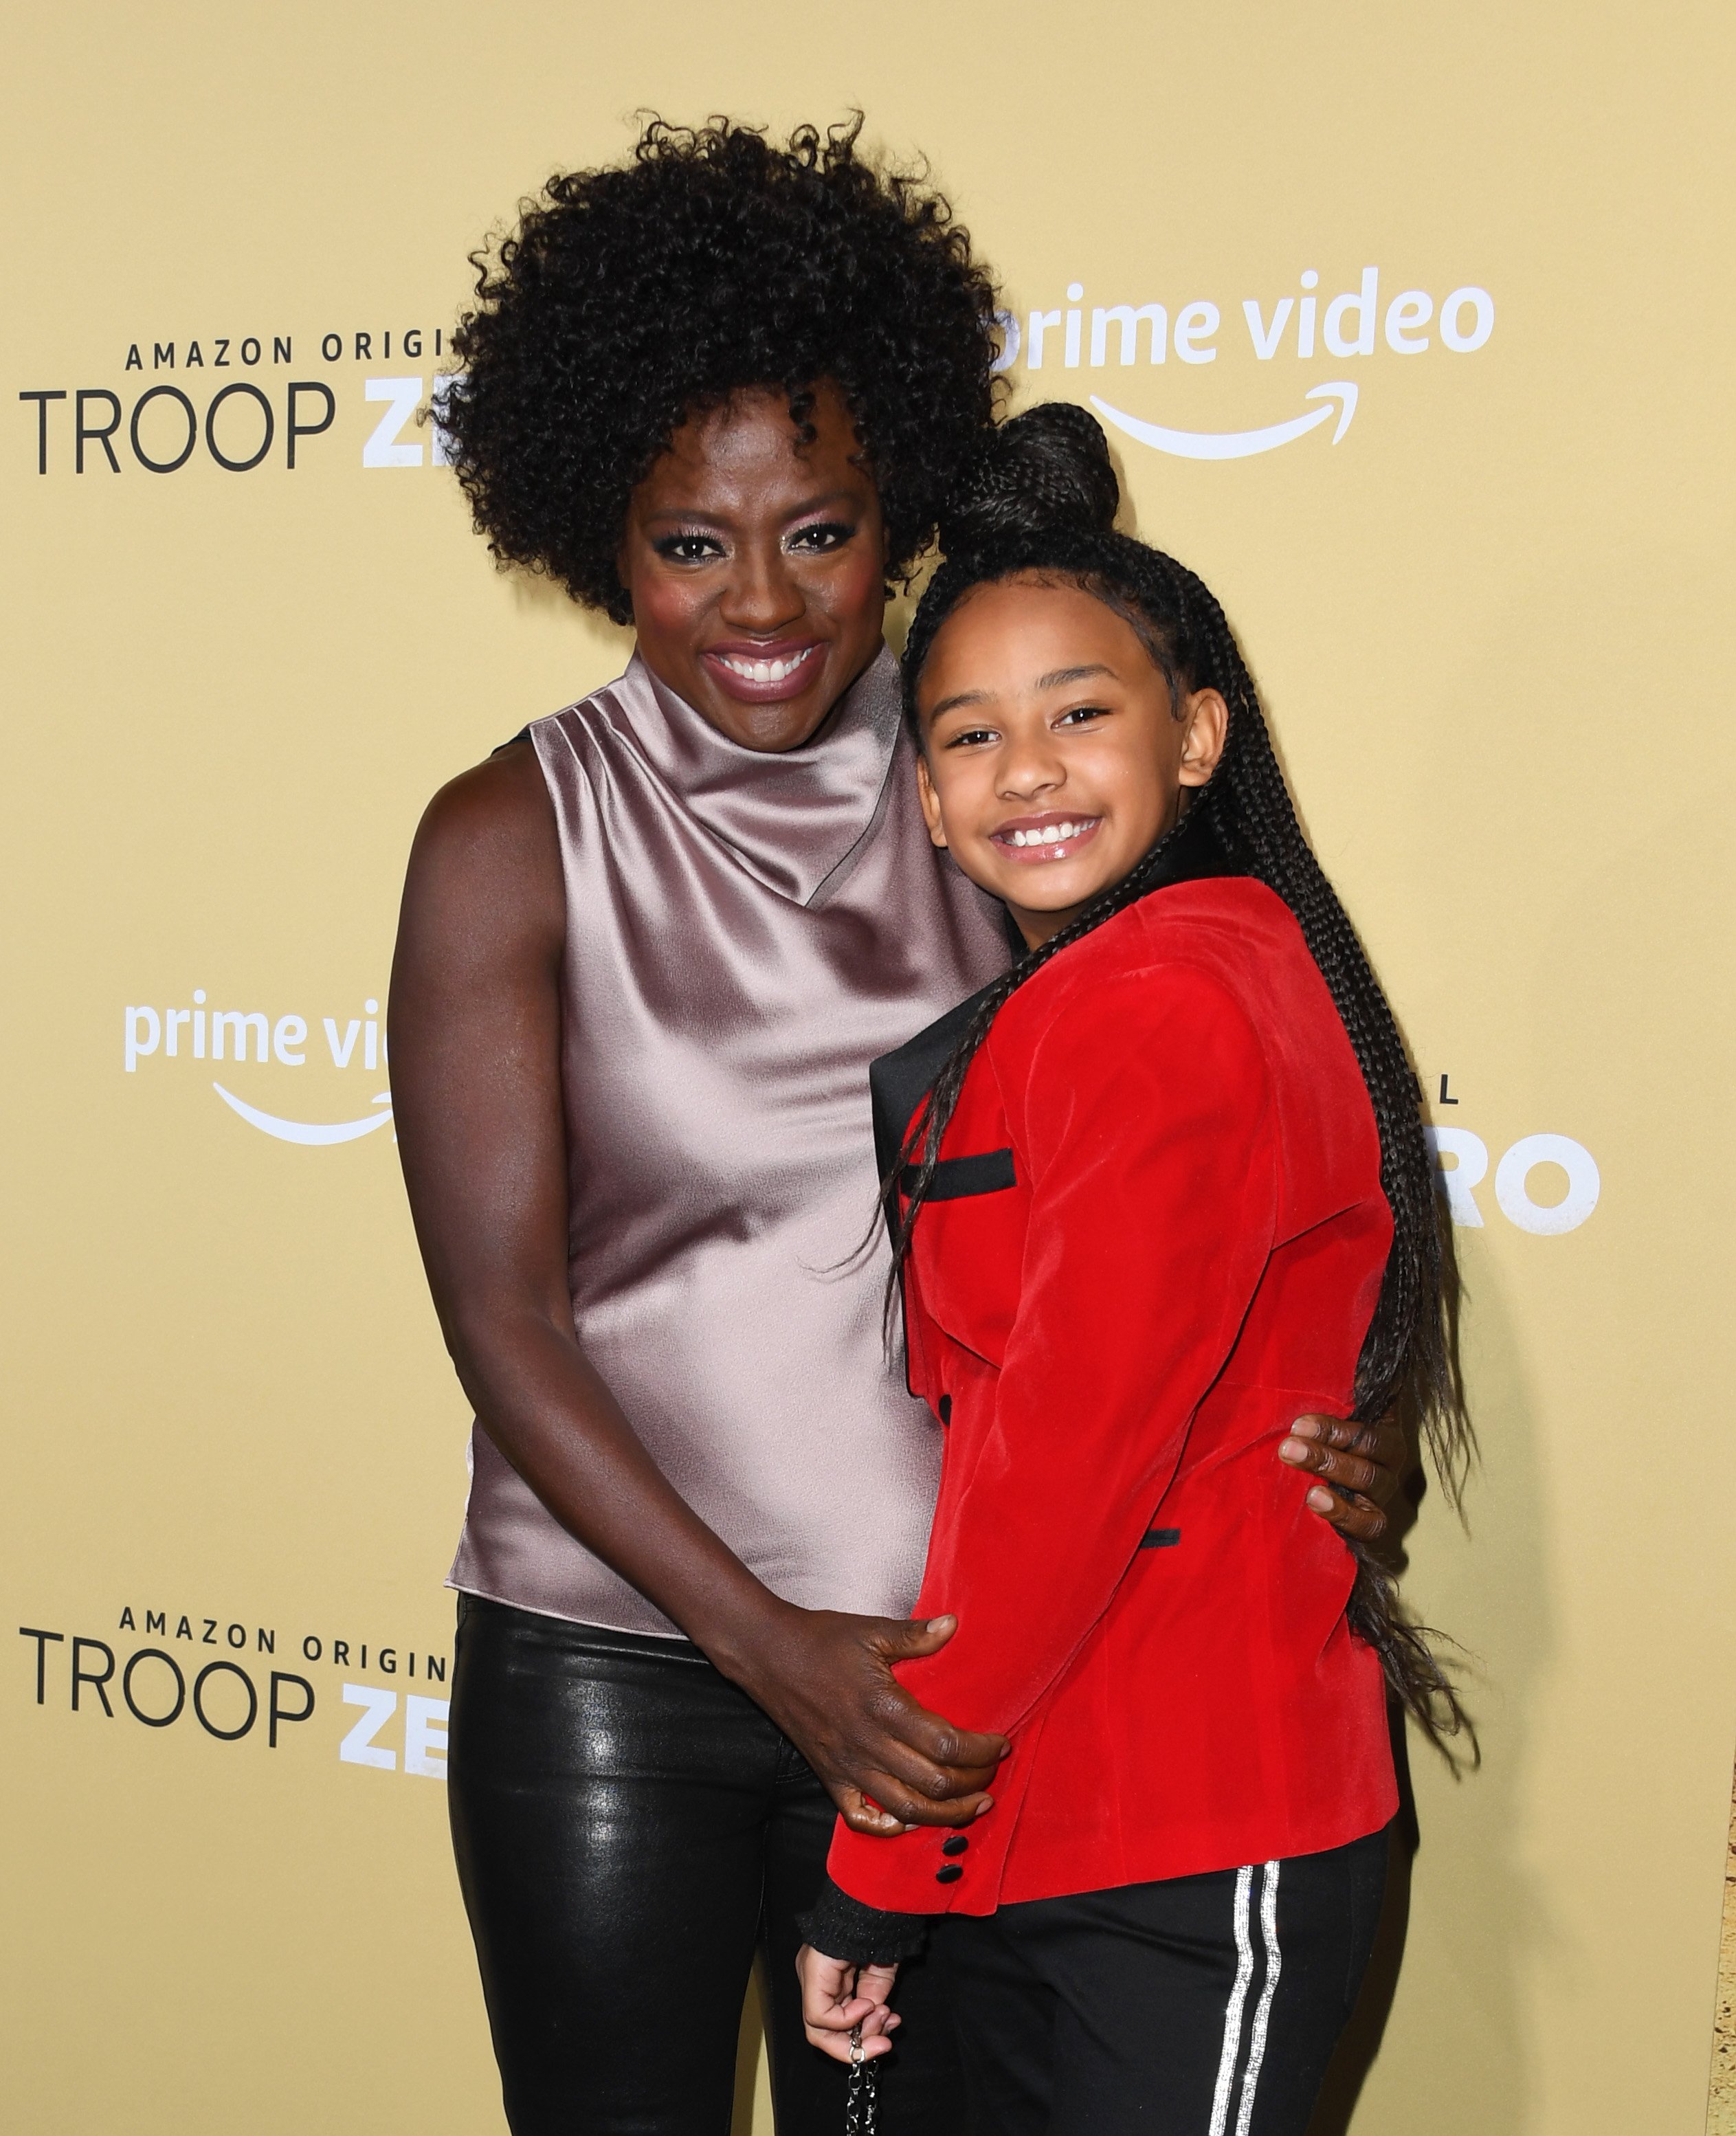 Viola Davis and daughter Genesis Tennon attend the "Troop Zero" film premiere on January 13, 2020, in Los Angeles, California. | Source: Getty Images